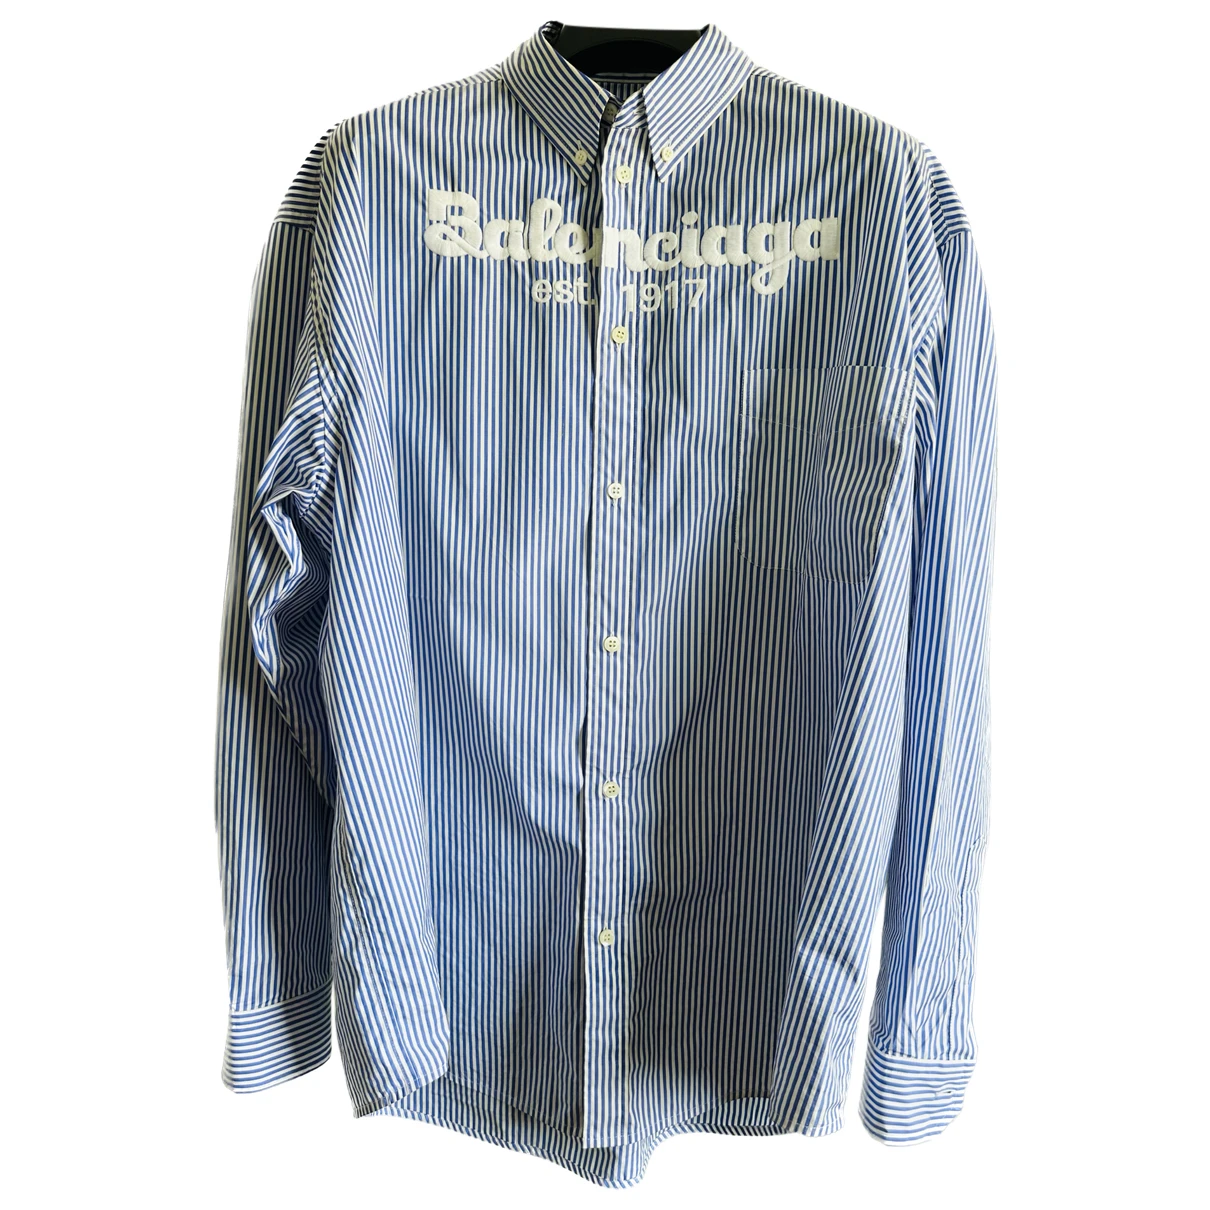 clothing Balenciaga shirts for Male Cotton S International. Used condition